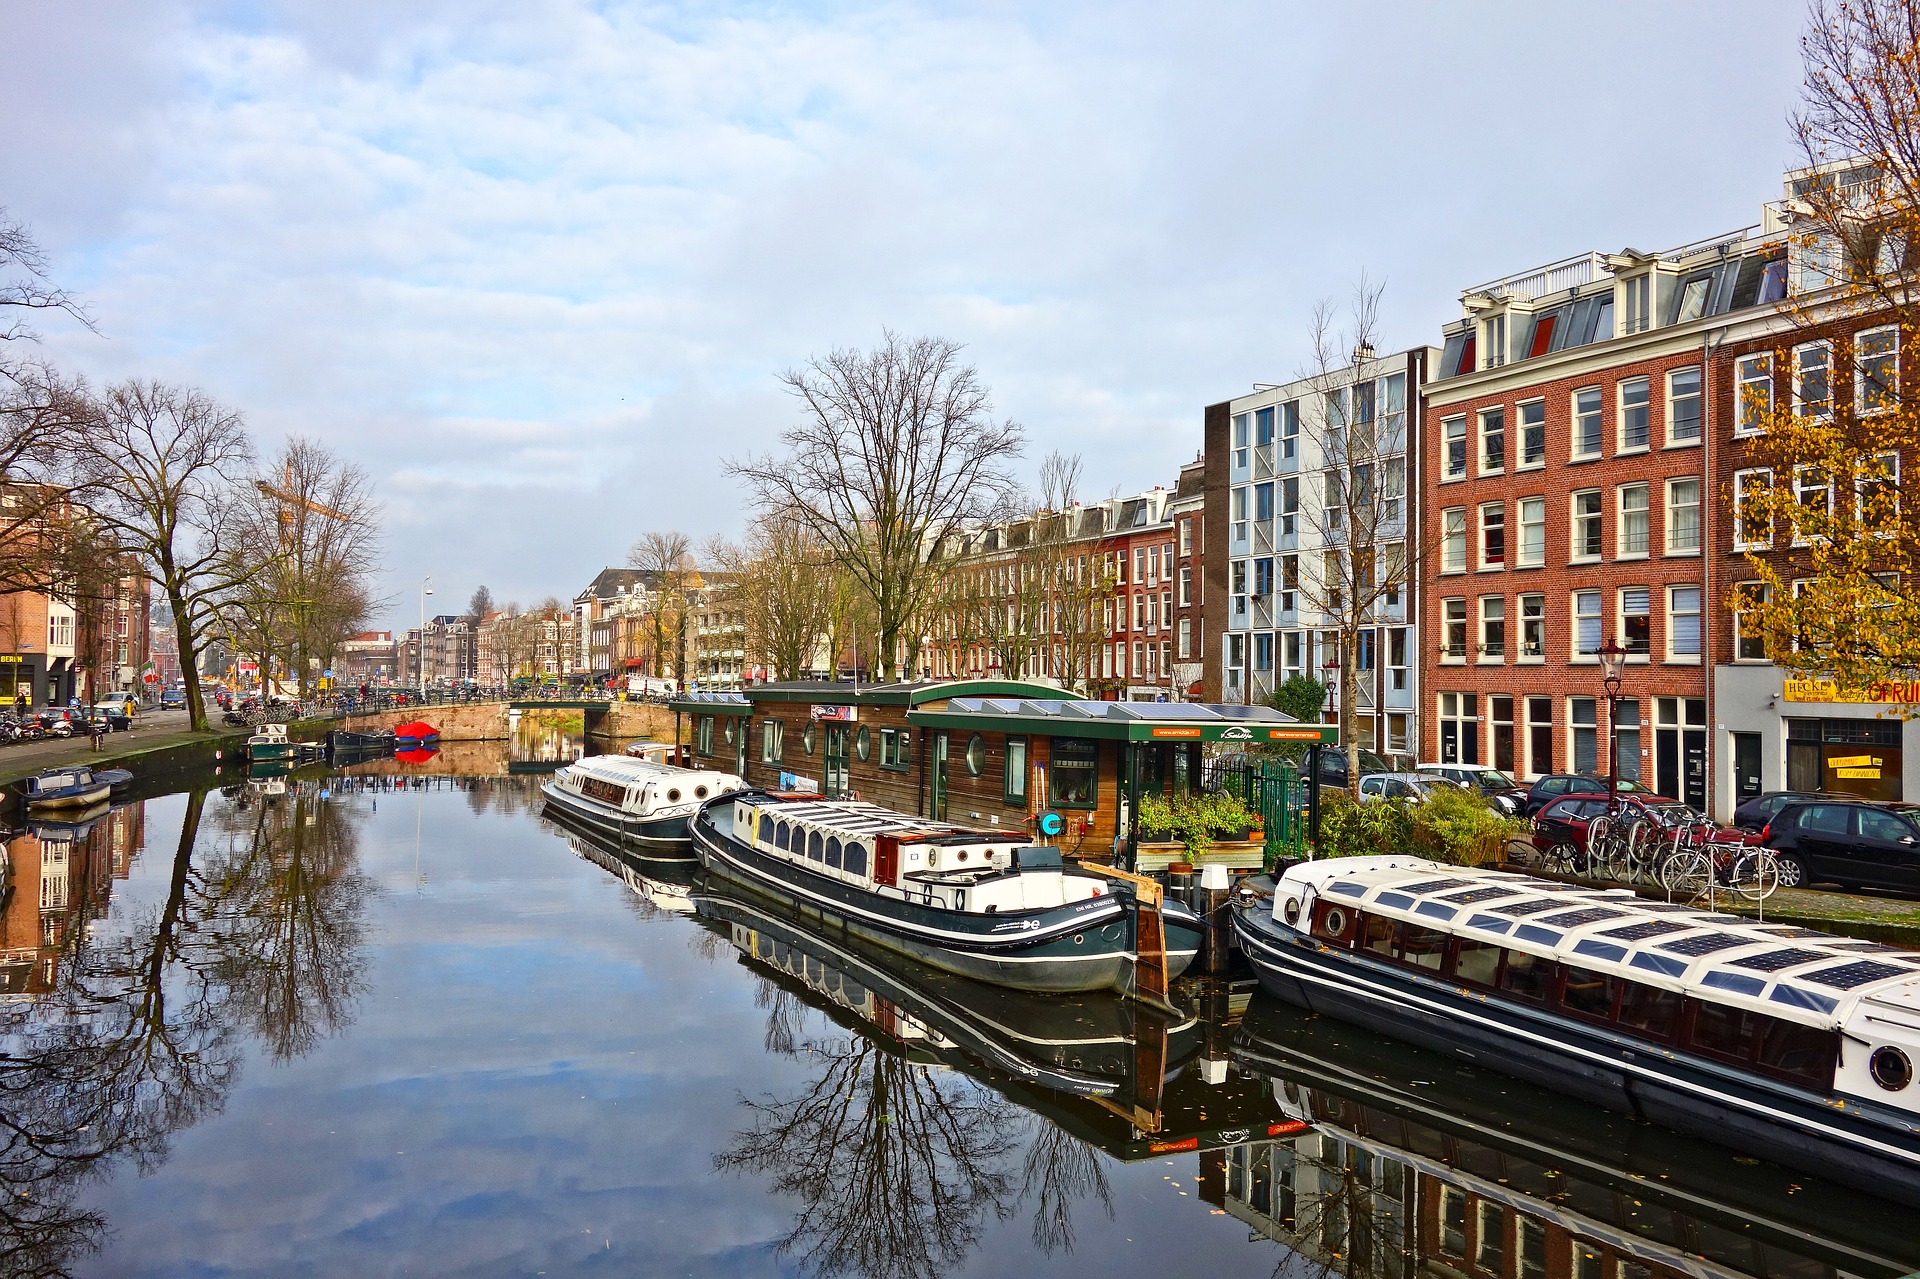 boats on a canal with buildings in the background